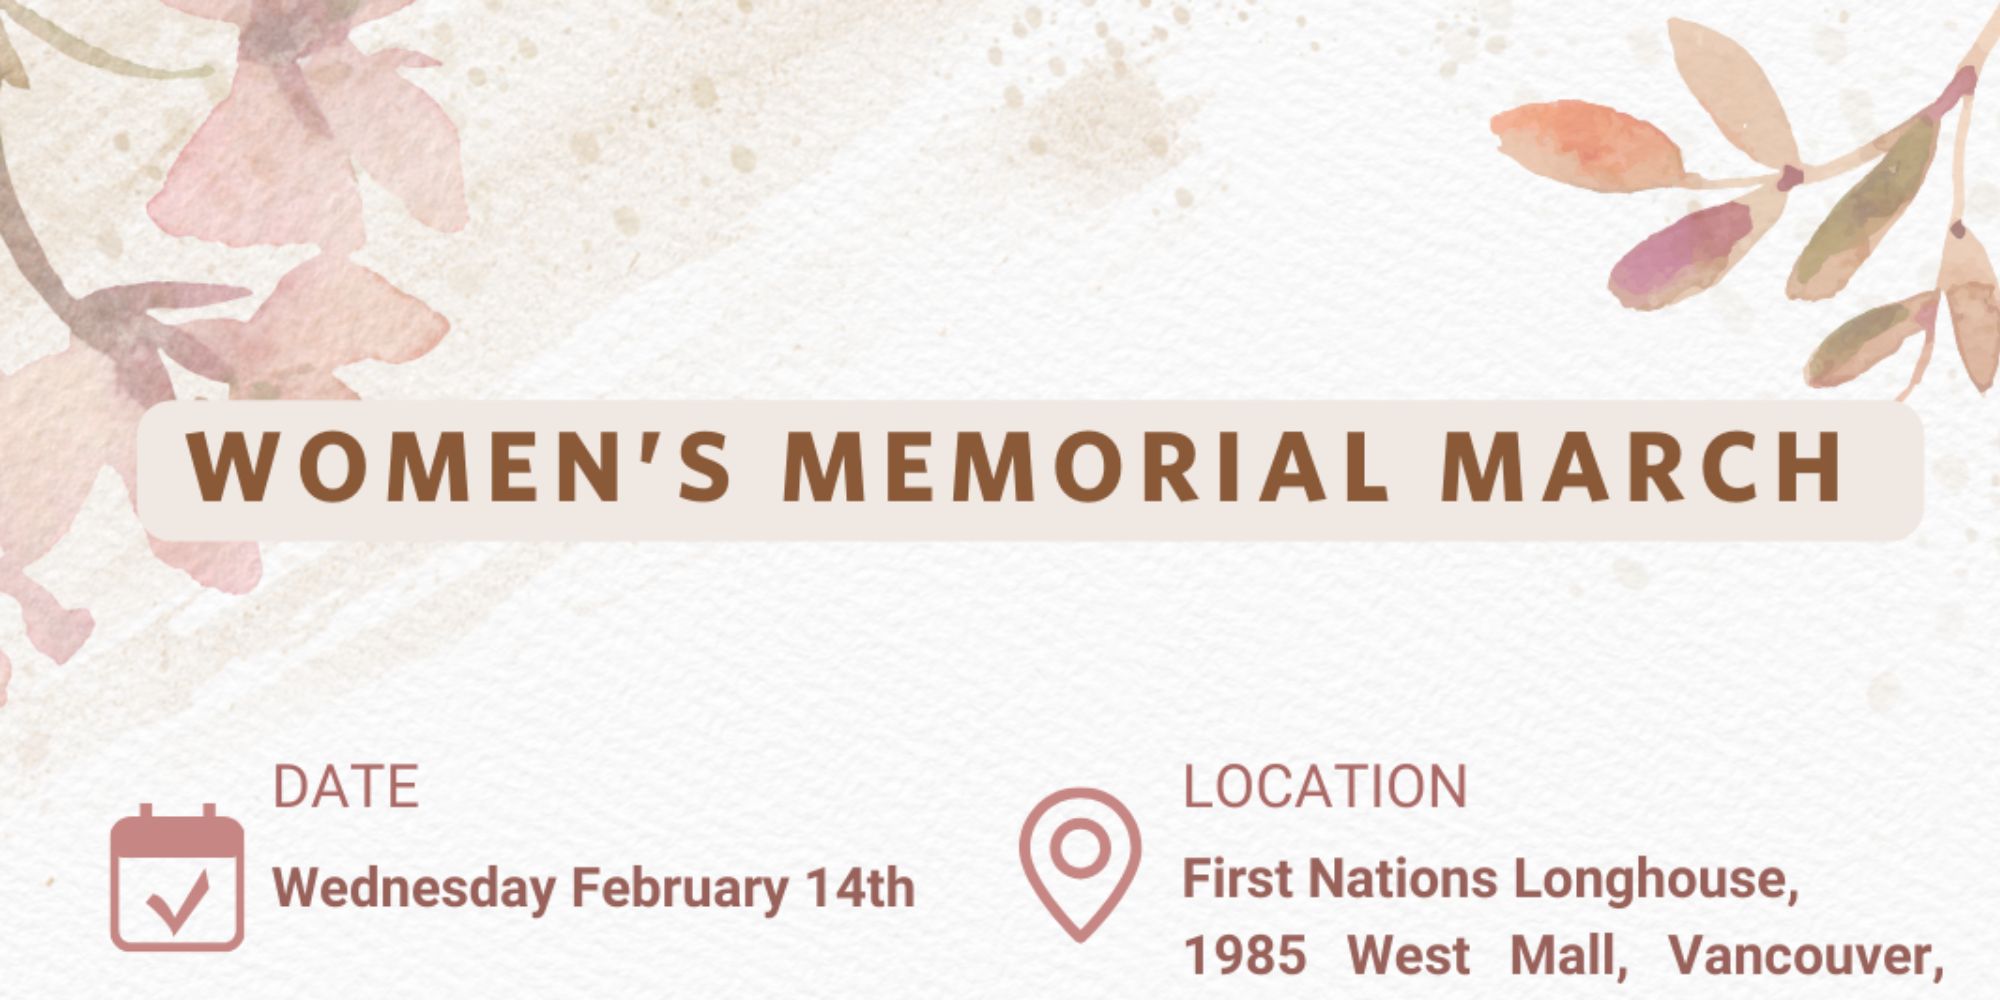 Women’s Memorial March (Feb 14): Honouring the lives of the Missing and Murdered Indigenous Women and Girls